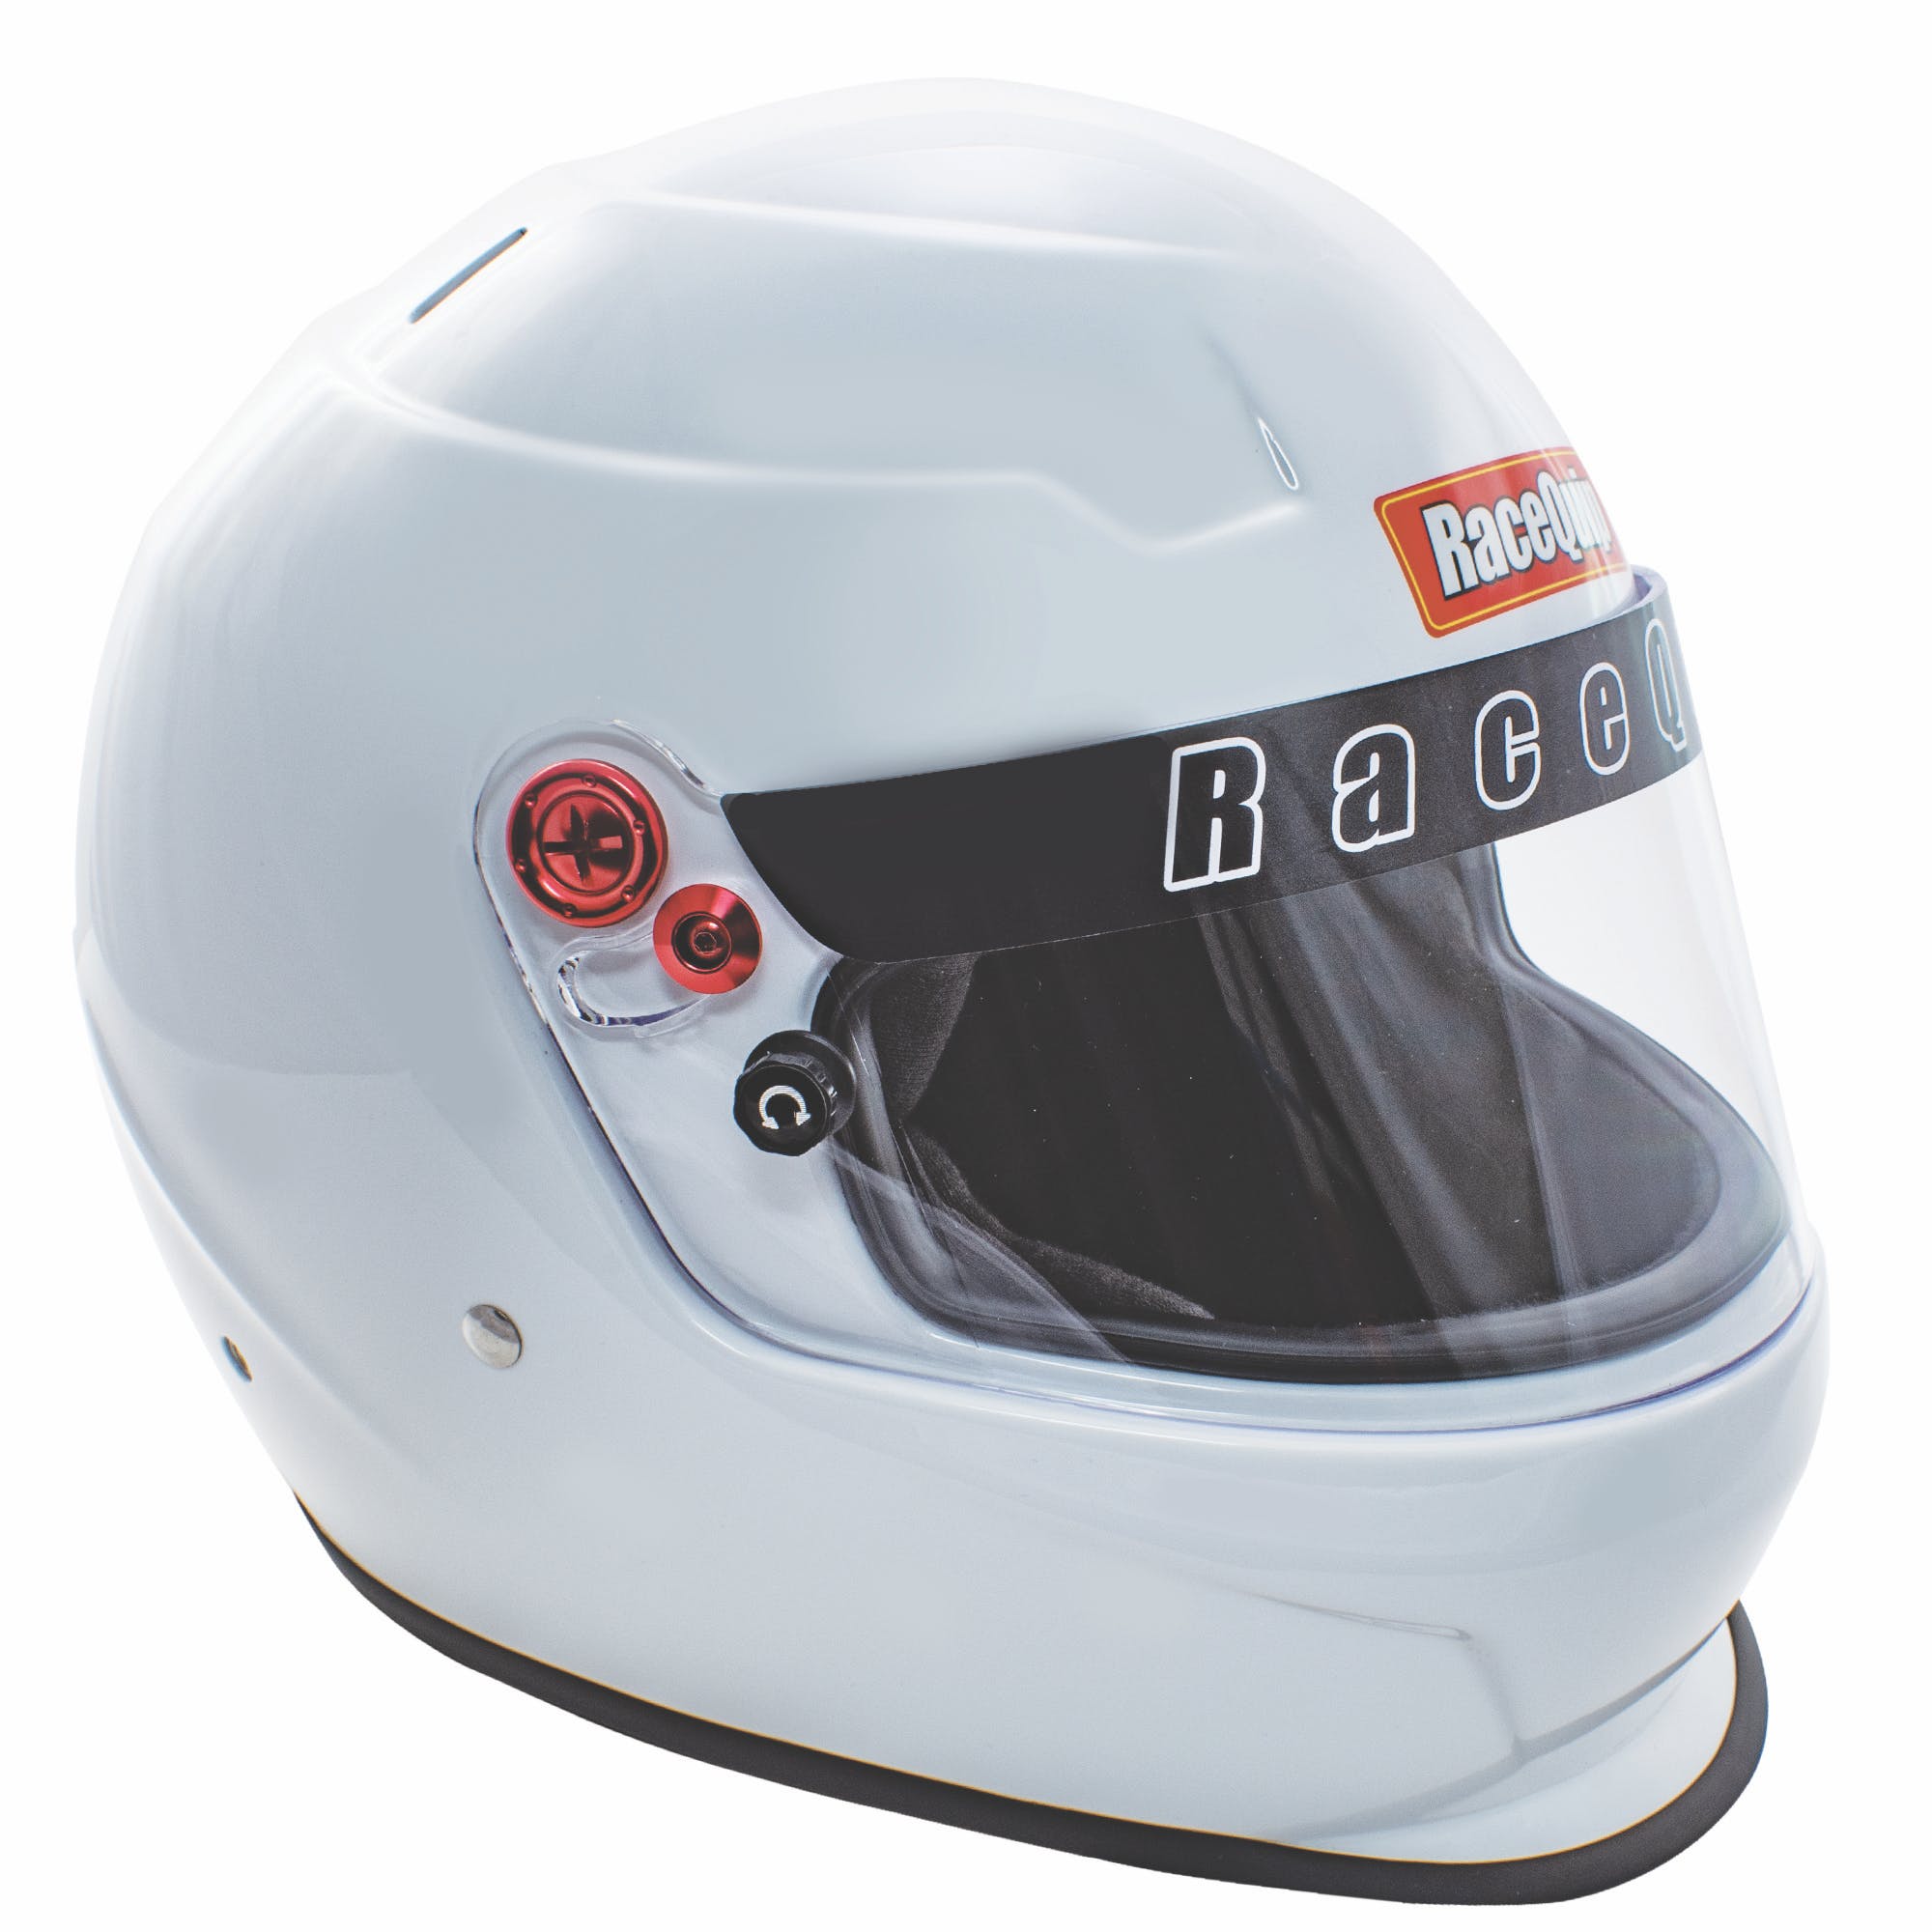 RaceQuip 276112 PRO20 Full Face Helmet Snell SA2020 Rated; Gloss White Small